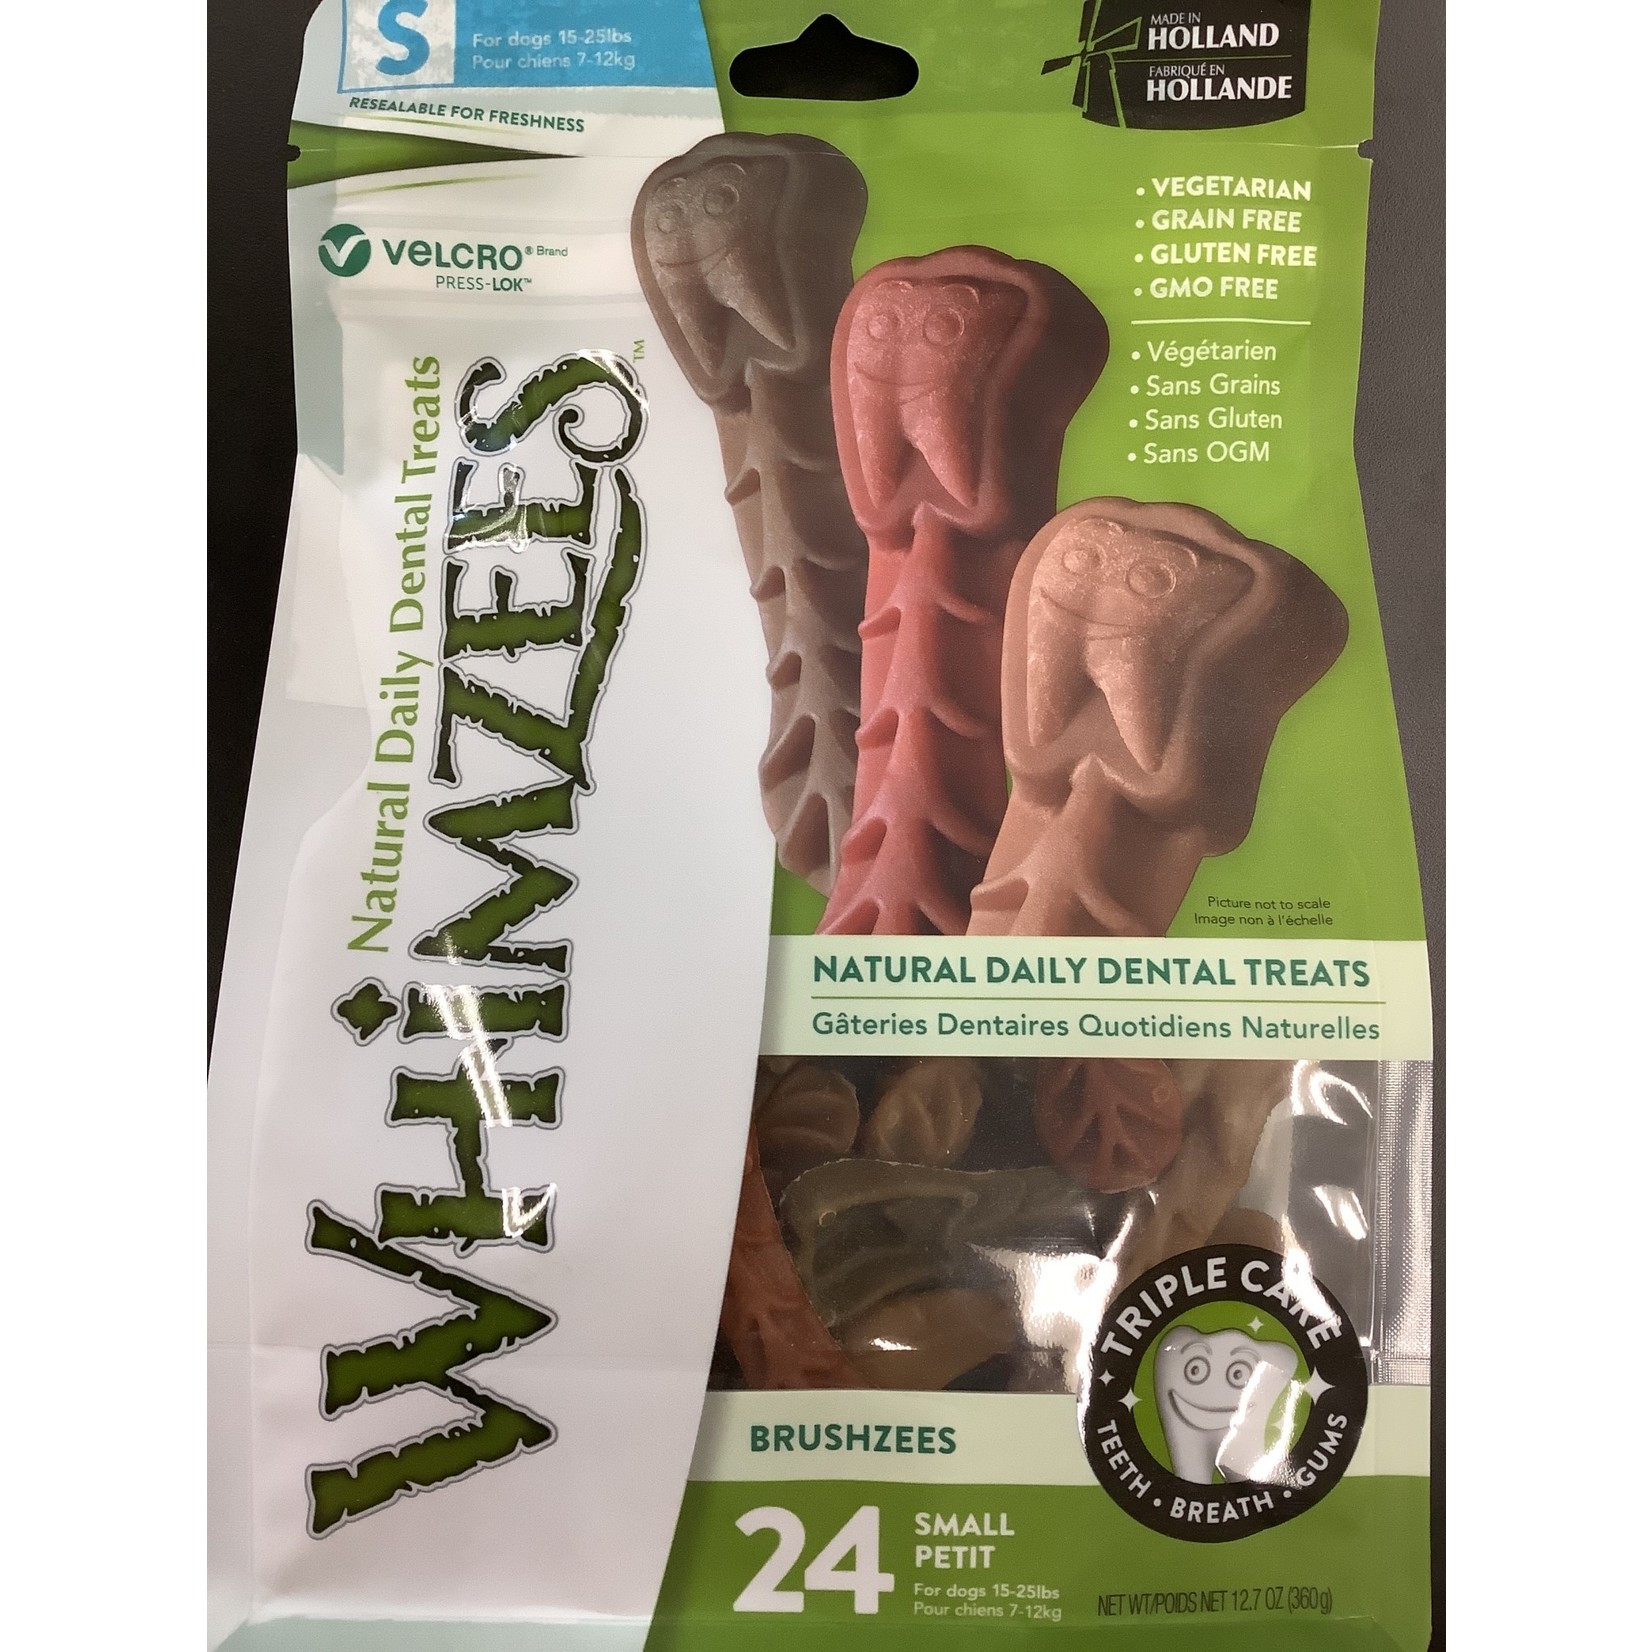 WHIMZEES WHIMZEES. Brushzees. 24 Small petit. 12.7OZ